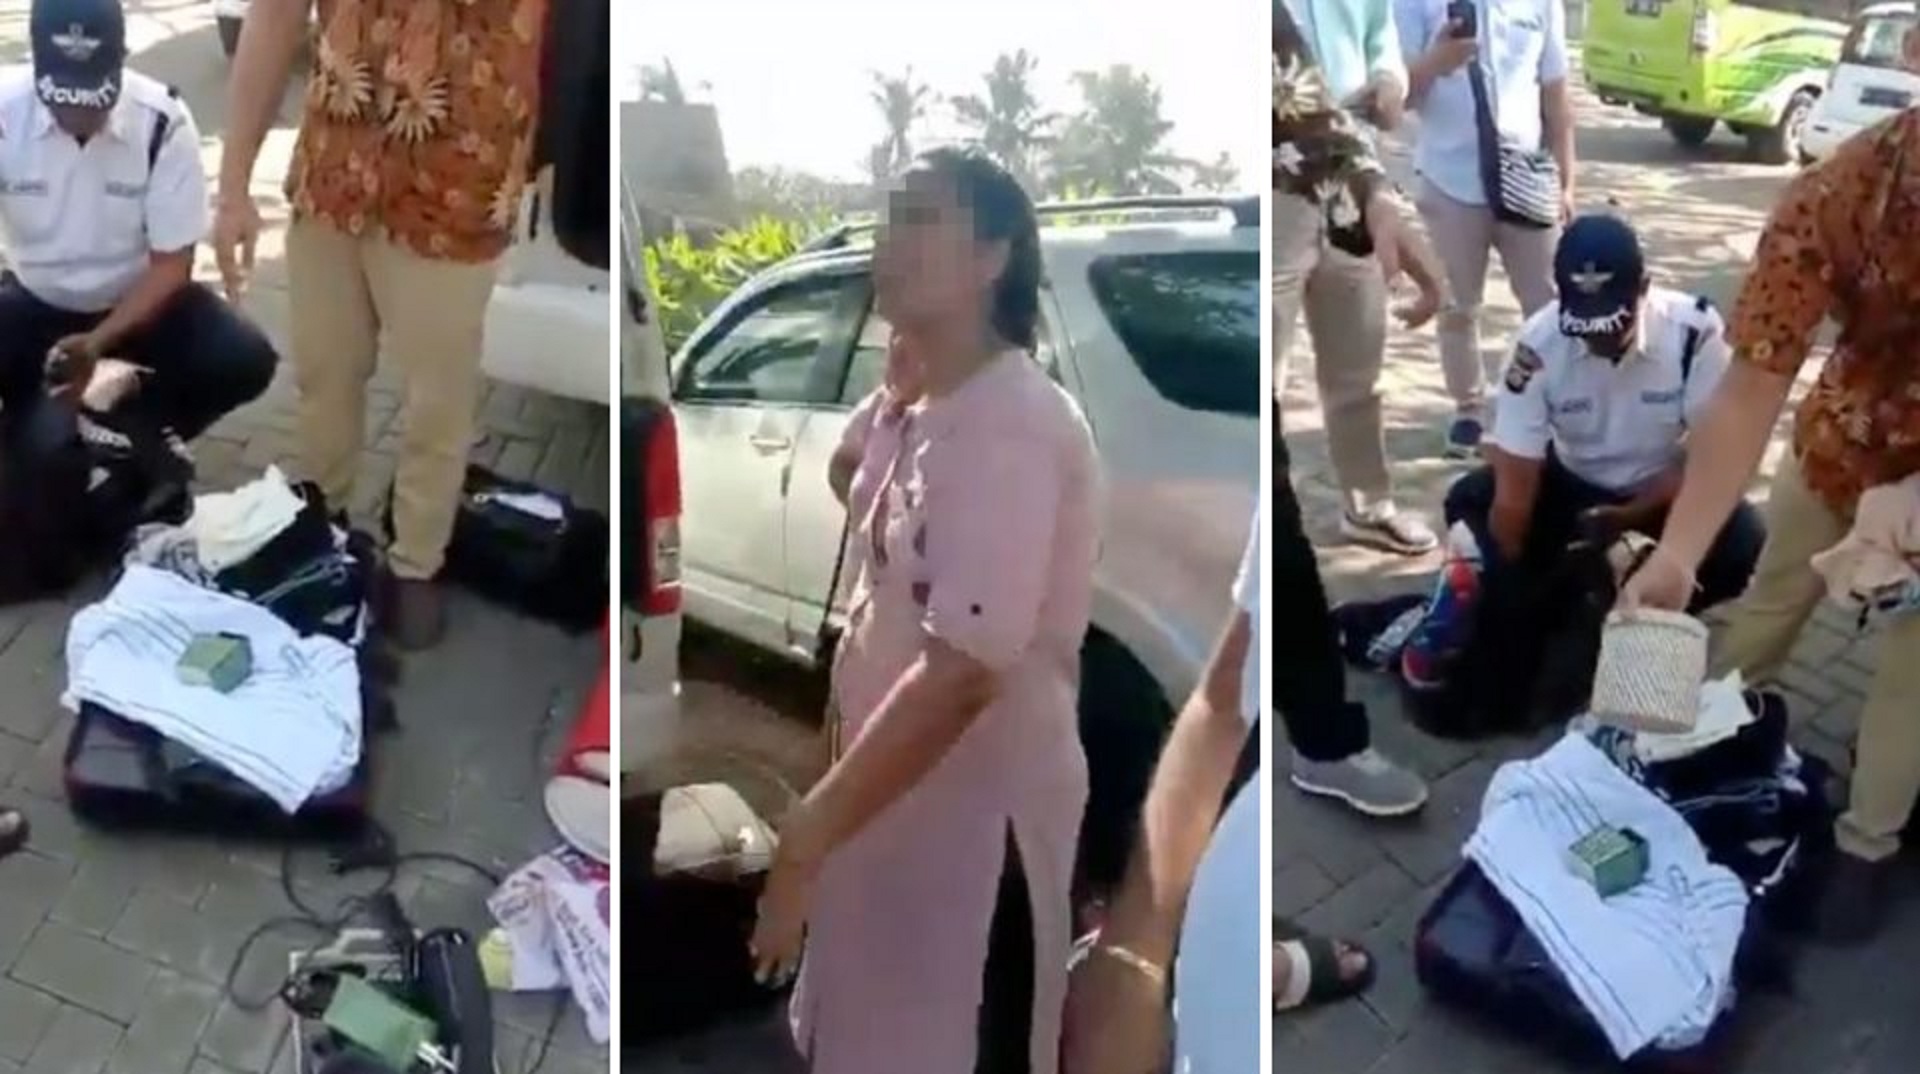 Watch: Indian Family Caught Stealing Items From Their Hotel Room in Bali